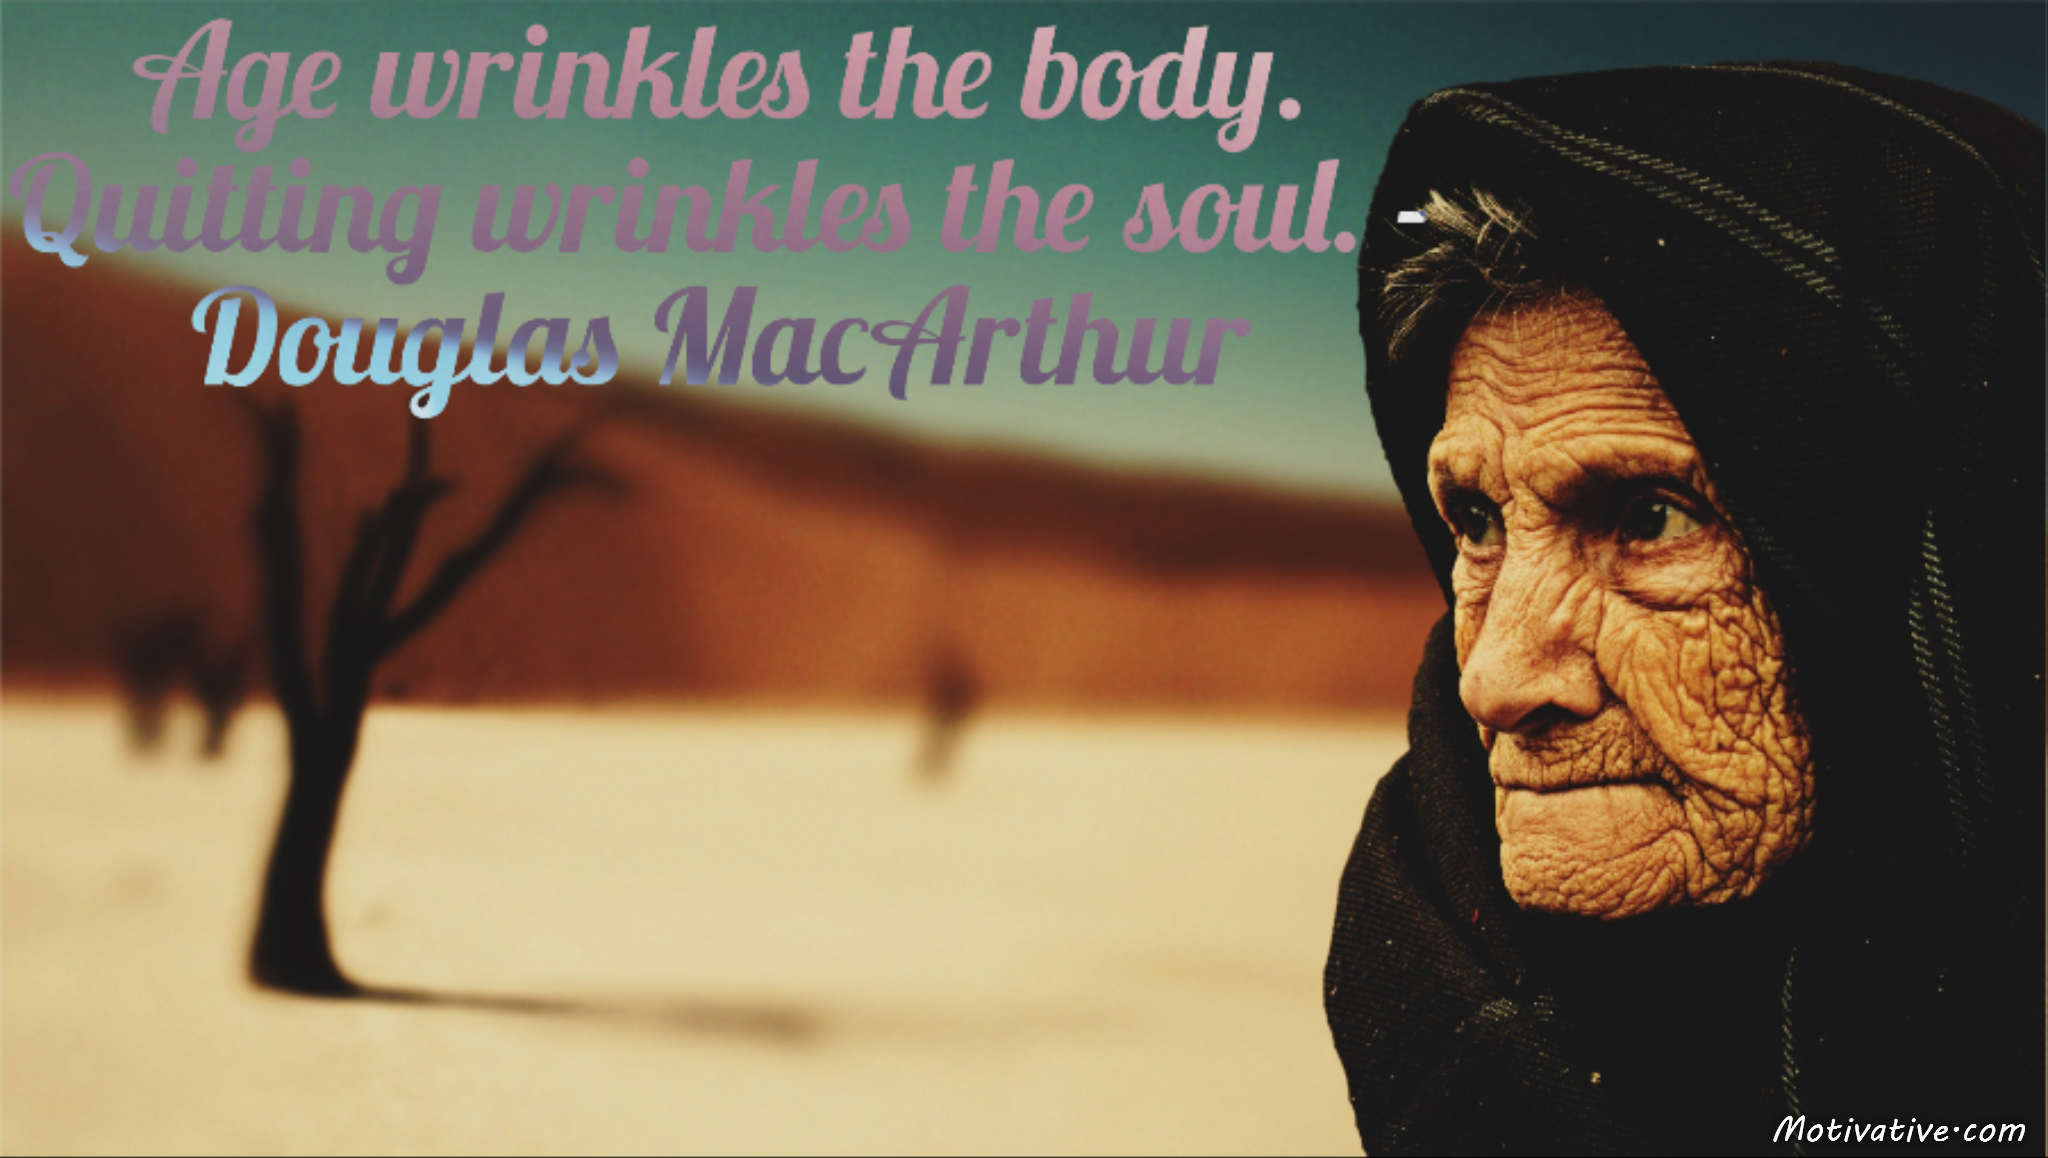 Age wrinkles the body. Quitting wrinkles the soul. – Douglas MacArthur